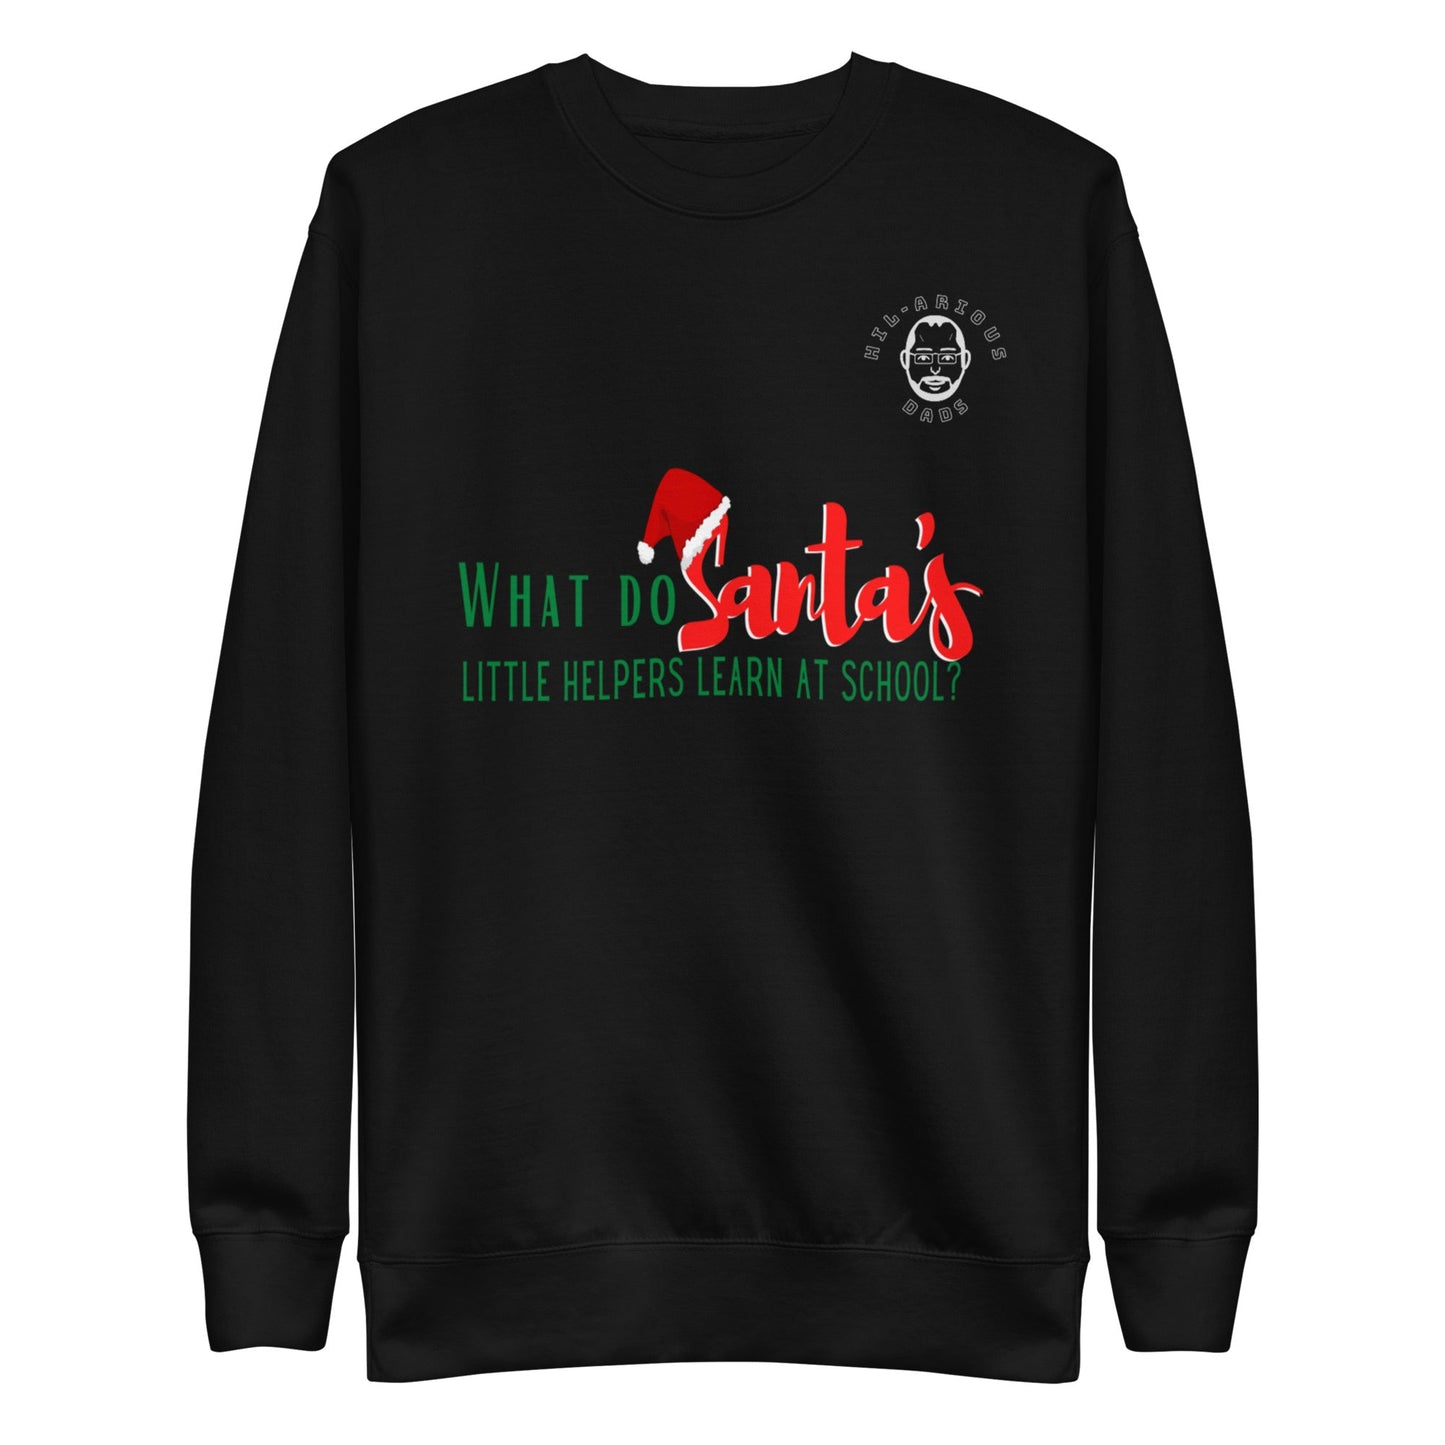 What do Santa’s little helpers learn at school?-Sweatshirt - Hil-arious Dads